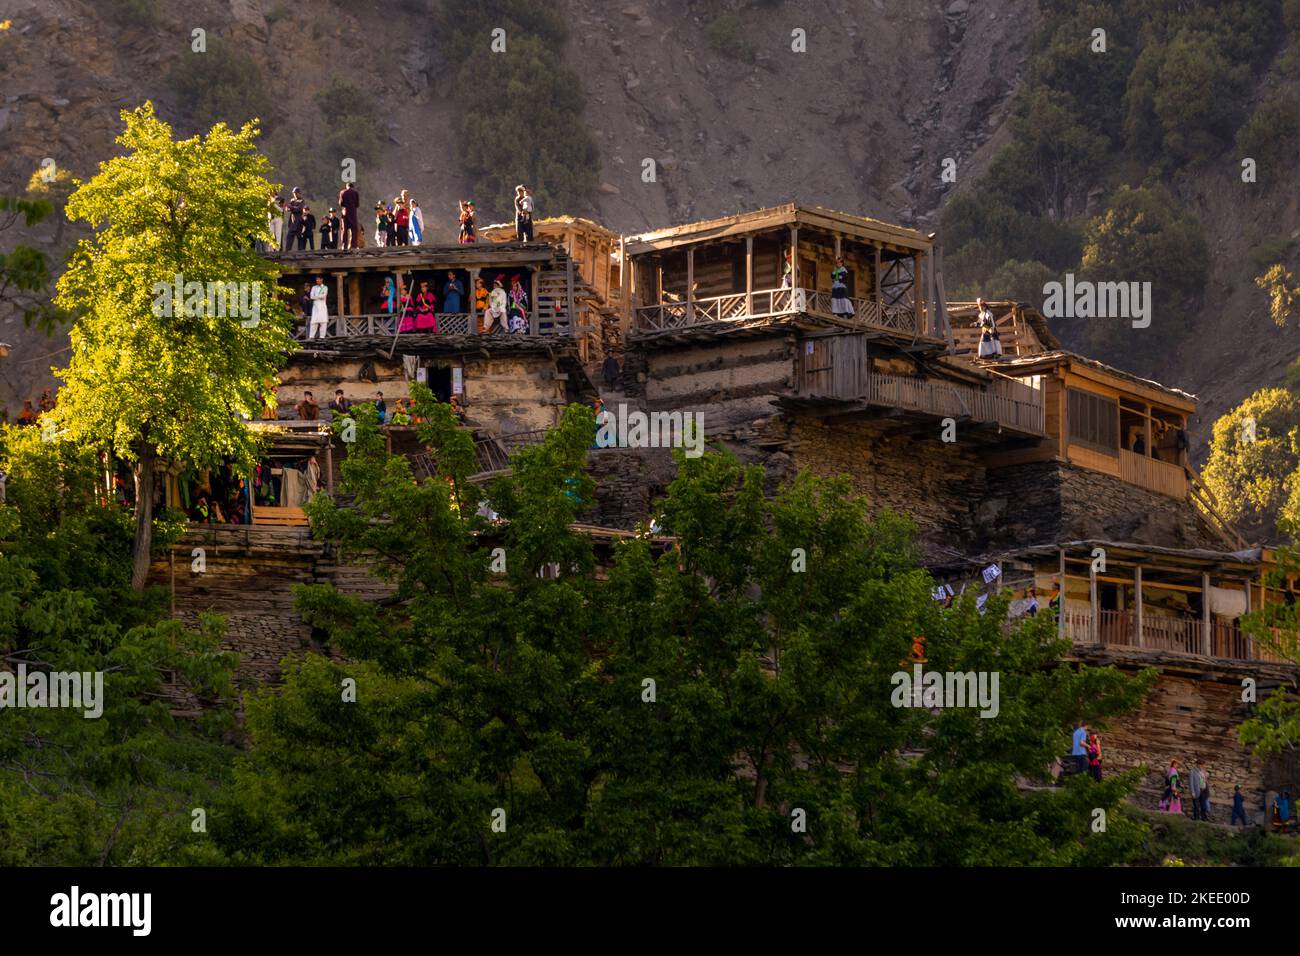 peoples of kalash are standing on the roofs an old and traditional village in chitral Stock Photo